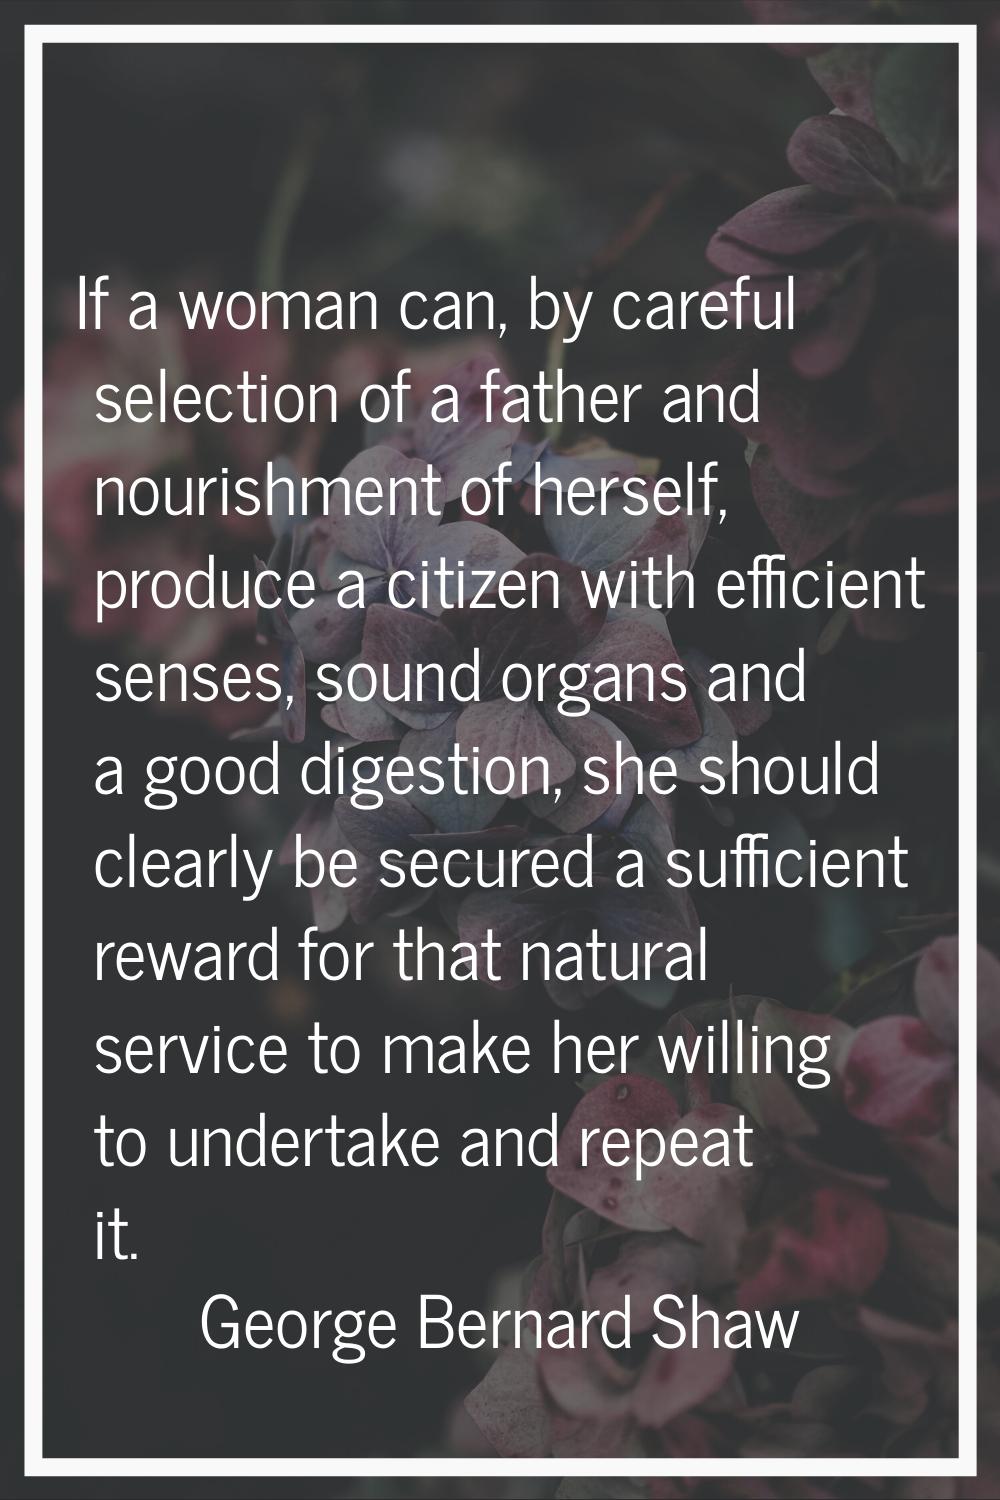 If a woman can, by careful selection of a father and nourishment of herself, produce a citizen with